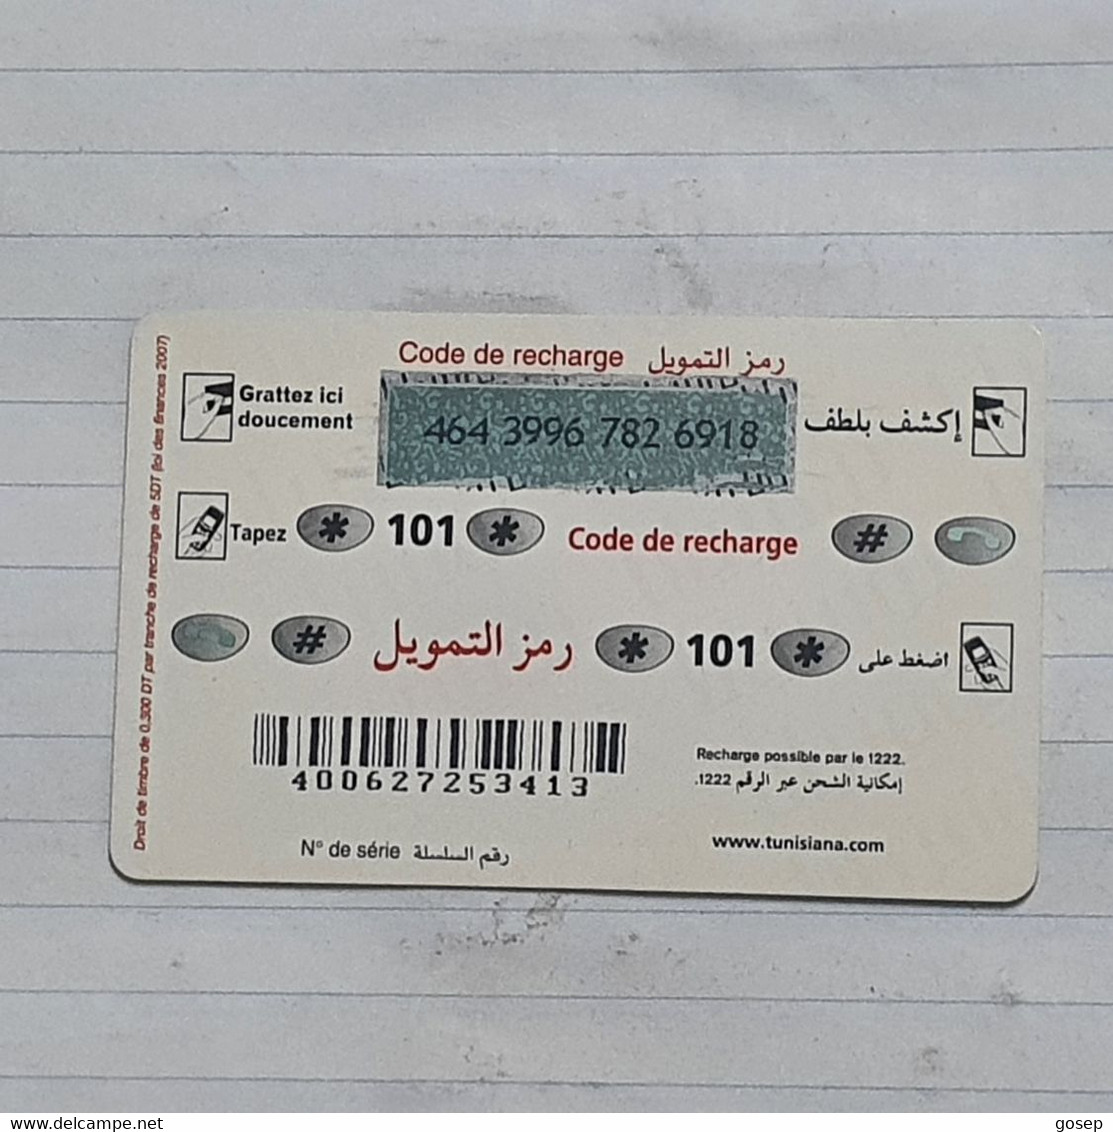 TUNISIA-(TUN-REF-TUN-22D)-GIRL IN CAR-(145)-(464-3996-782-6918)-(look From Out Side Card Barcode)-used Card - Tunesien